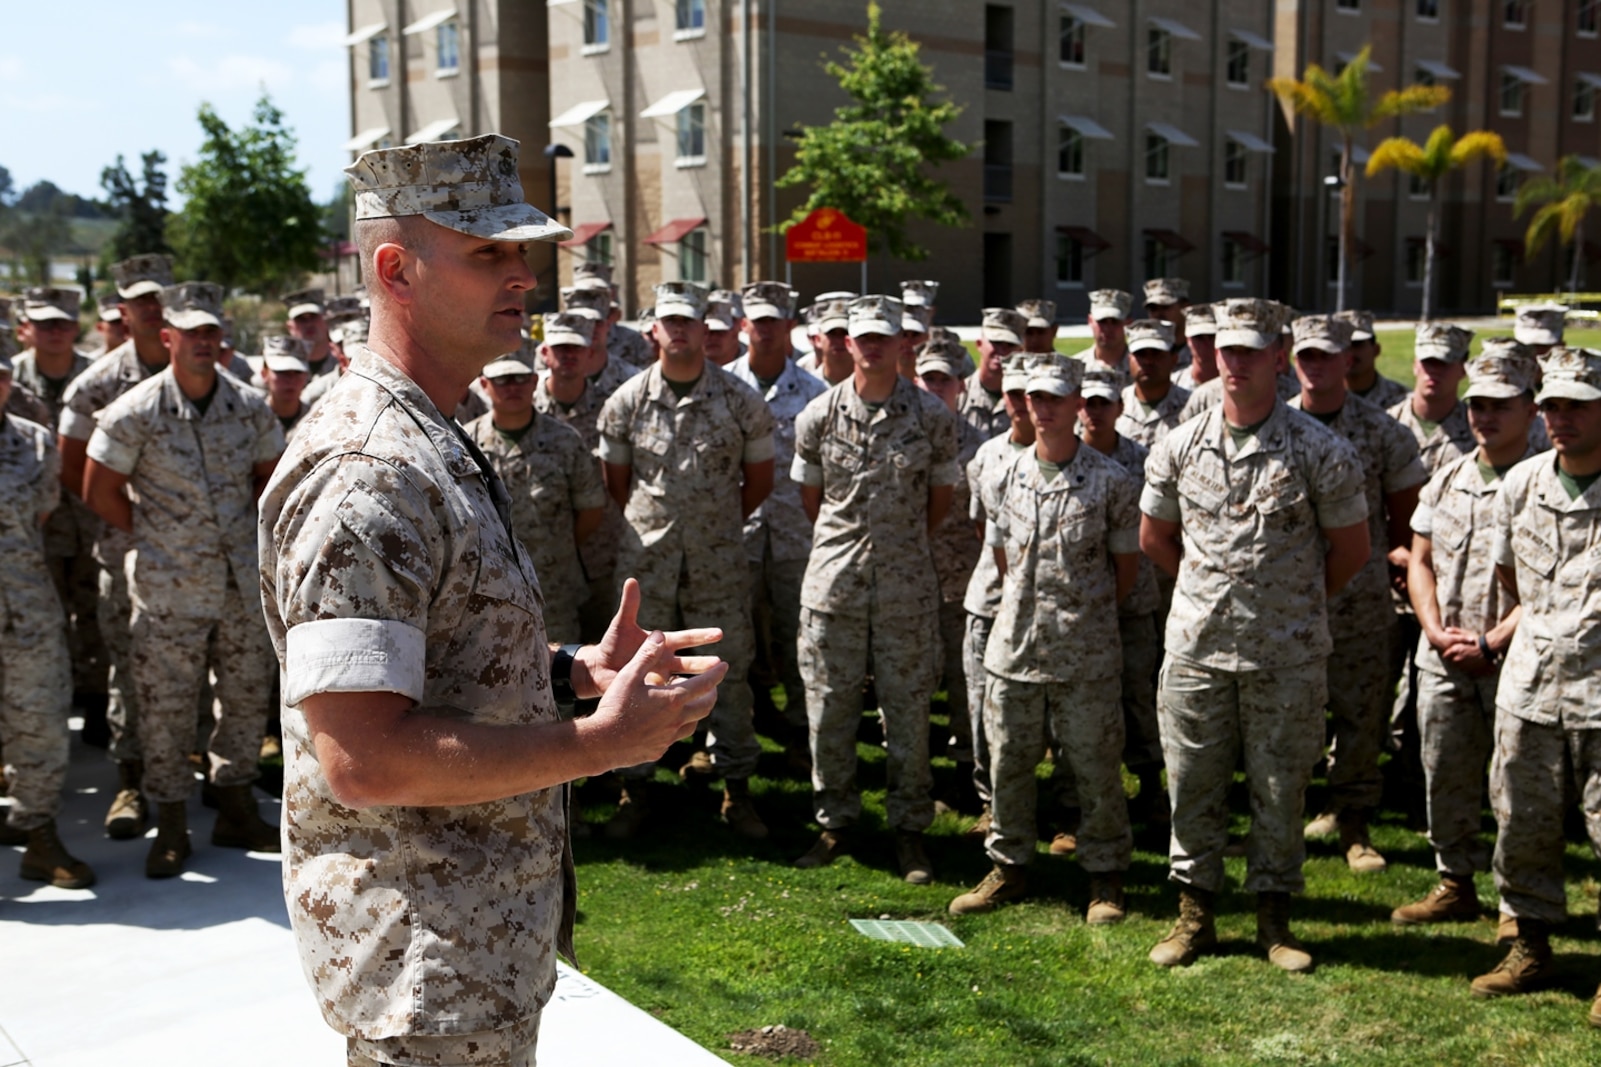 U.S. Marine Lt. Col. Eric J. Penrod addresses non-commissioned officers from 7th Engineer Support Battalion at the opening of a new NCO lounge, known as Chapultepec’s, in their barracks building aboard Camp Pendleton, Calif., April 15, 2016. Penrod is the commanding officer of 7th ESB. The newly opened lounge is dedicated to give the NCOs a place in the barracks to come together and unwind, forming stronger camaraderie in their ranks. (U.S. Marine Corps photo by Cpl. Carson Gramley/released)